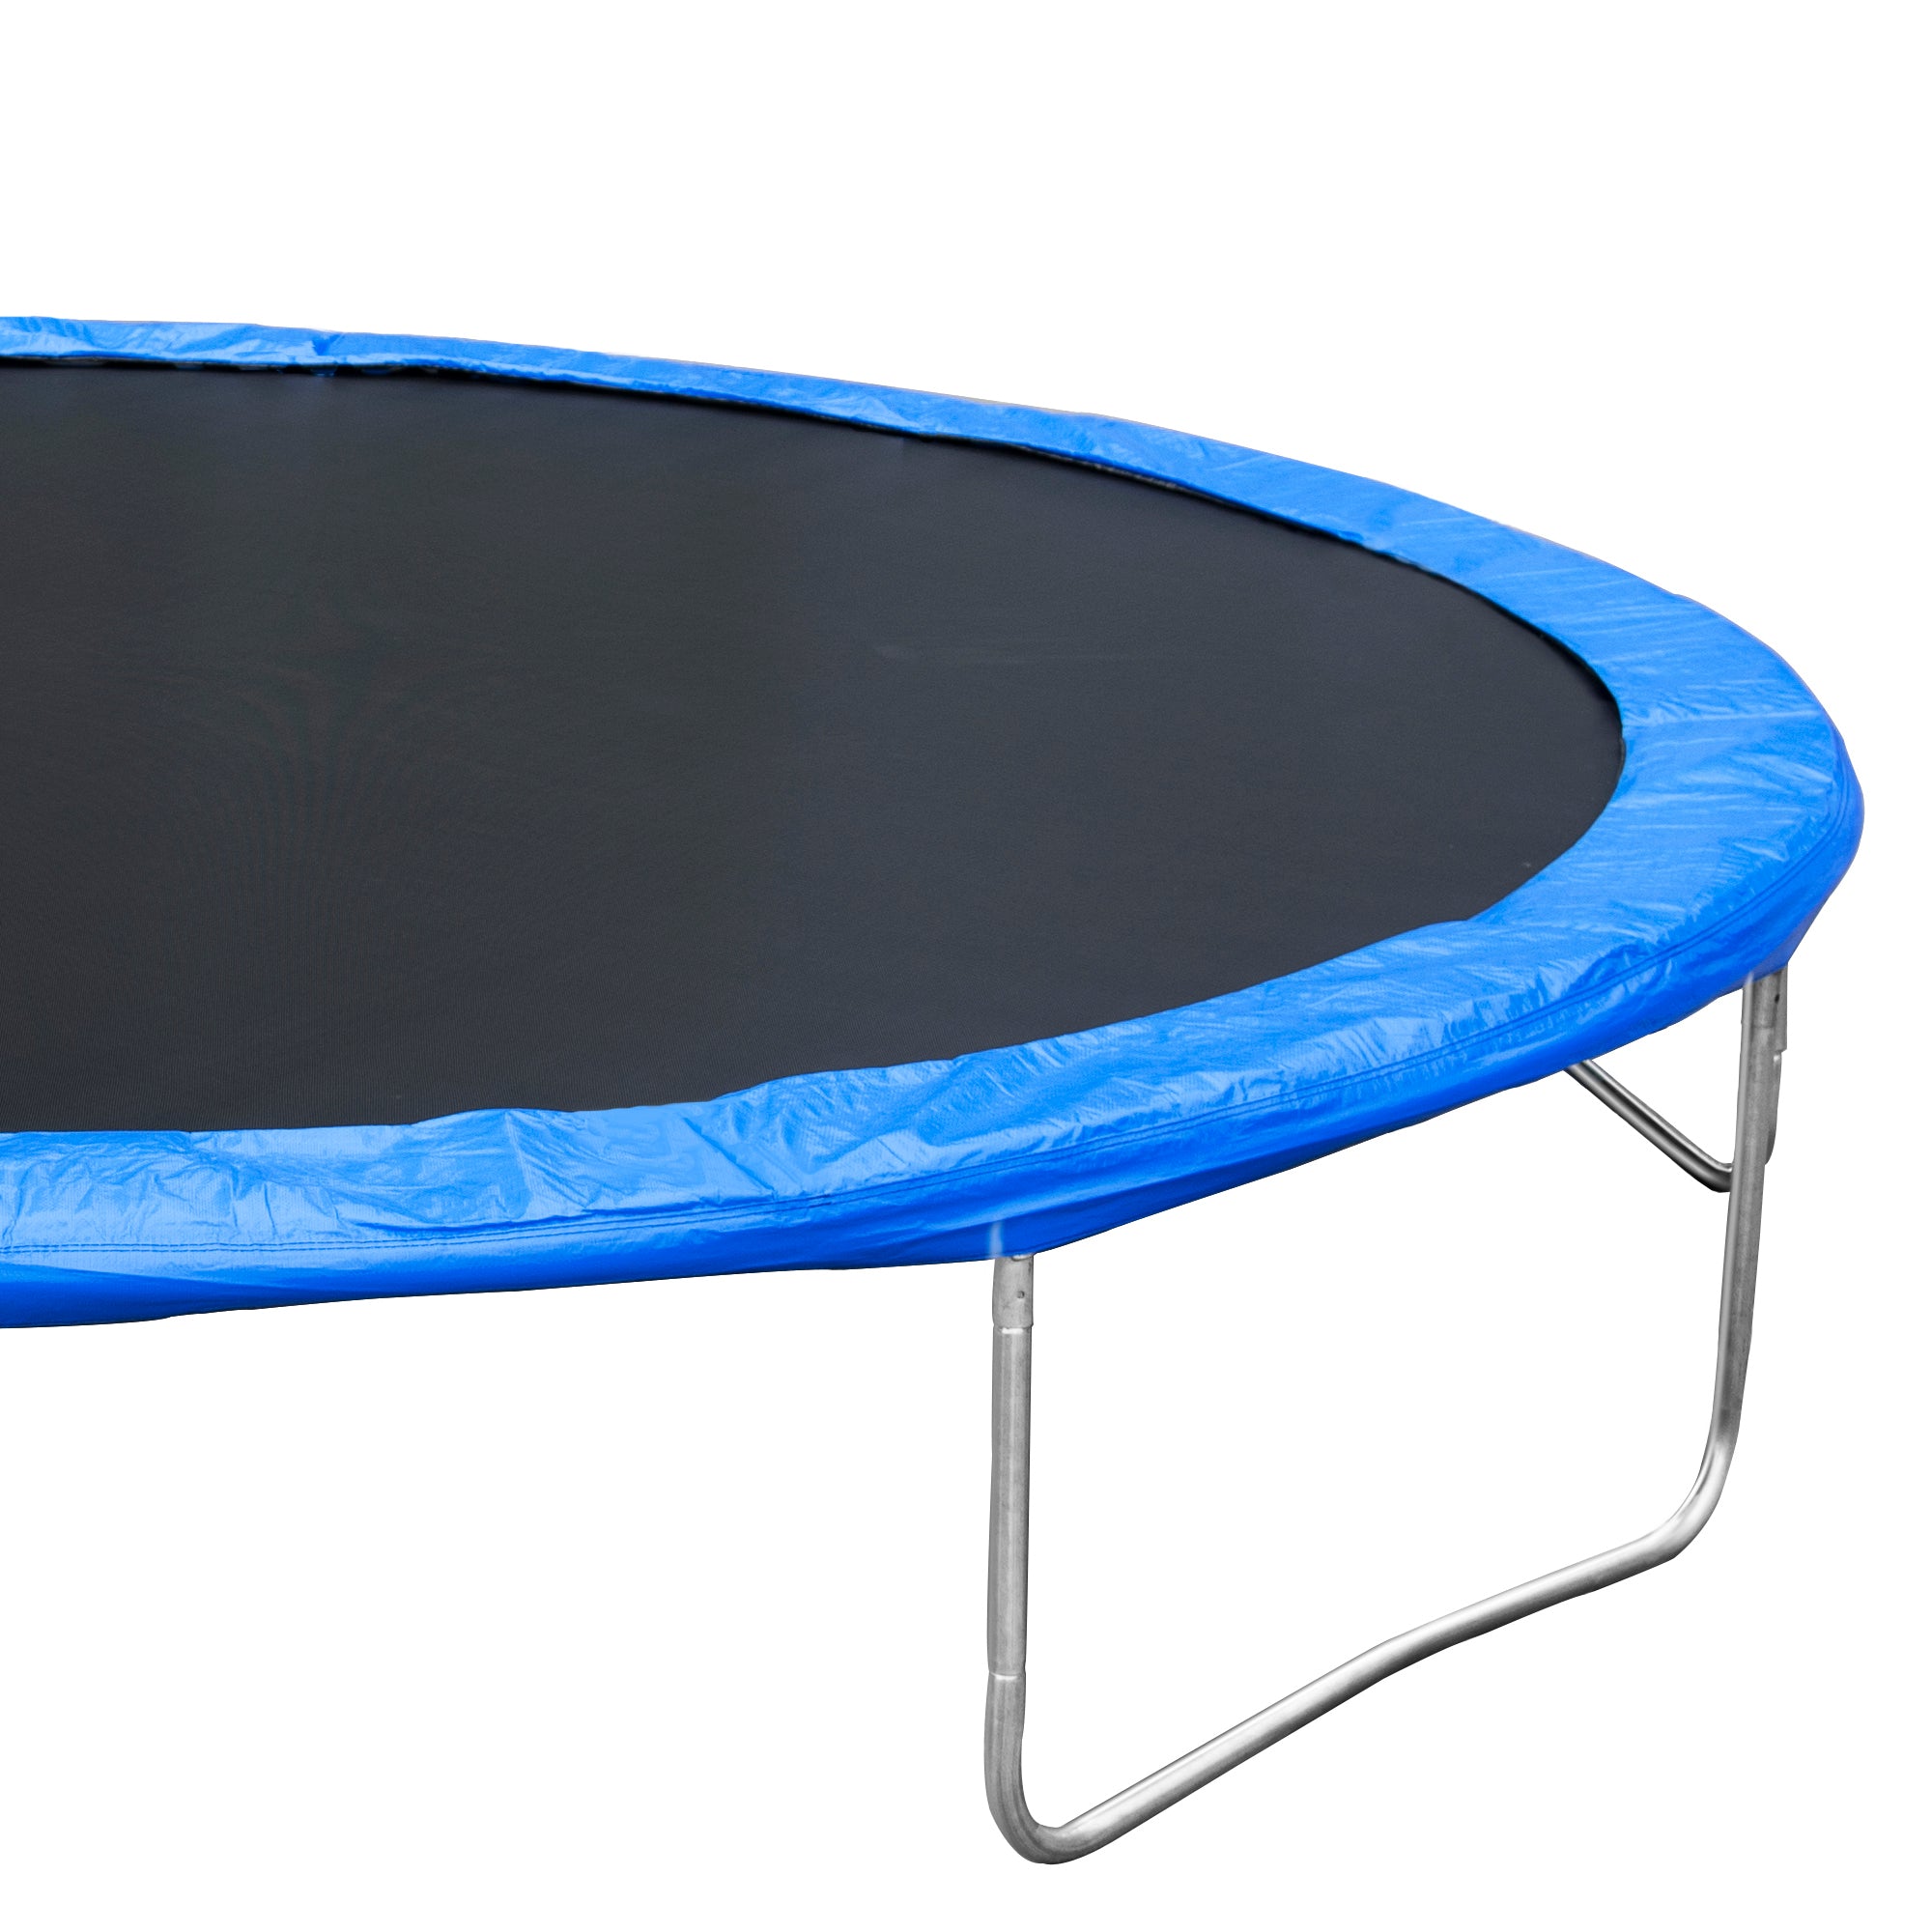 14FT Trampoline for Adults & Kids with Basketball blue-metal